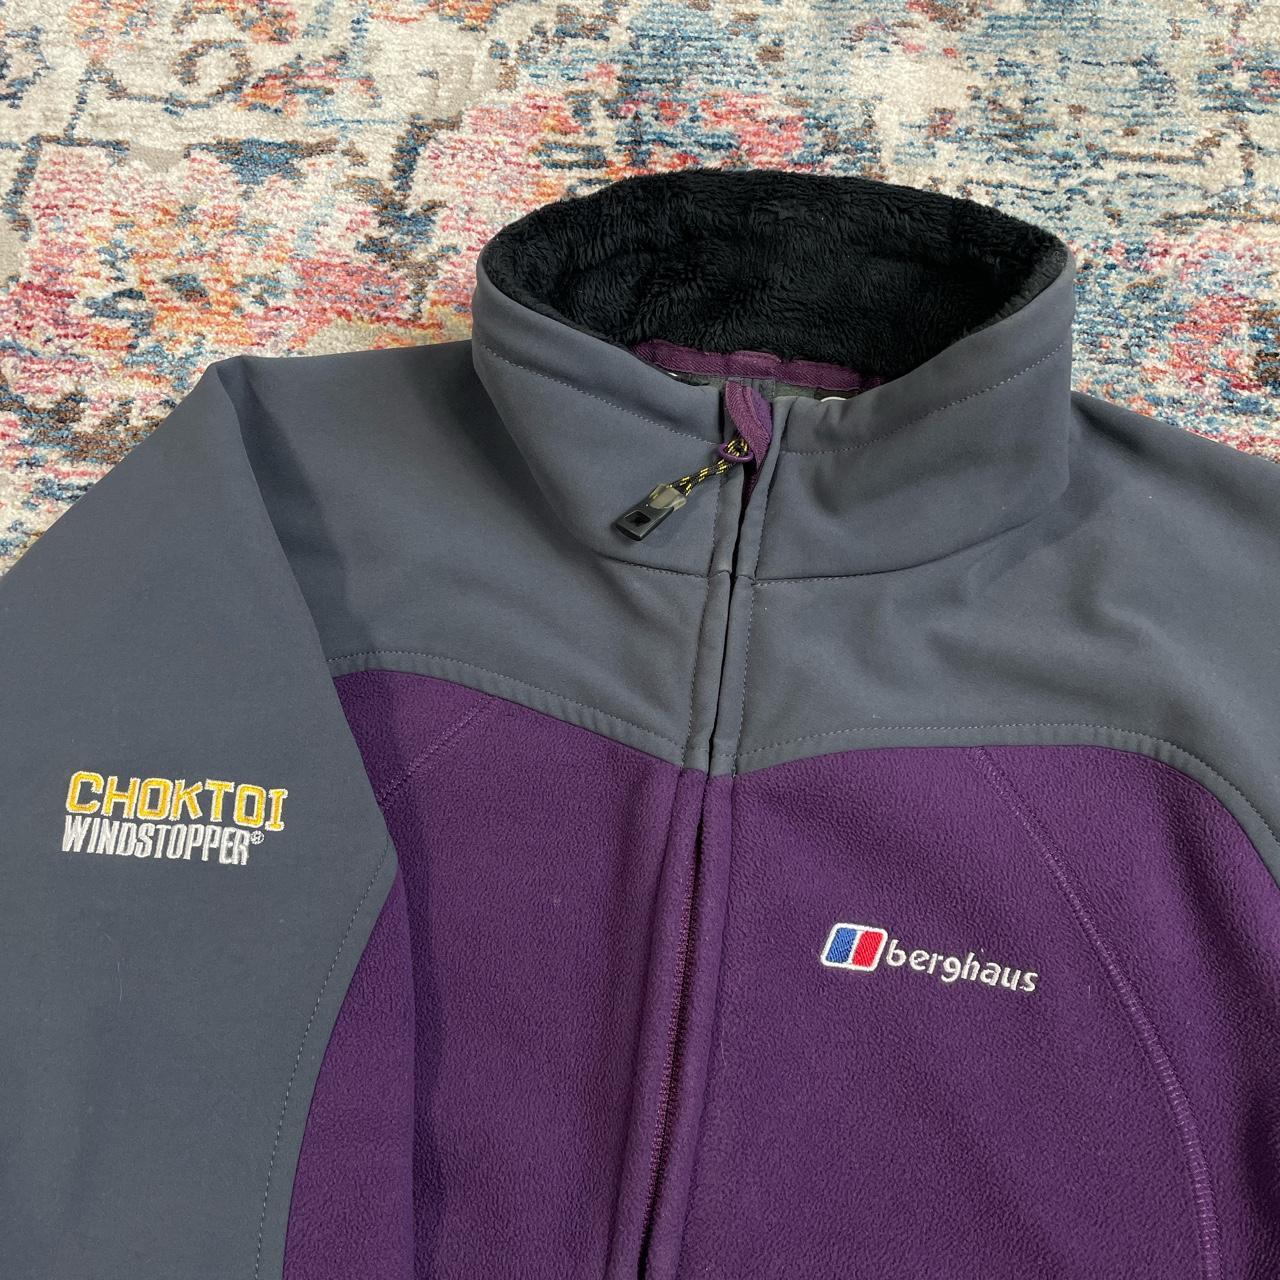 Berghaus Purple and Grey Windstopper Jacket